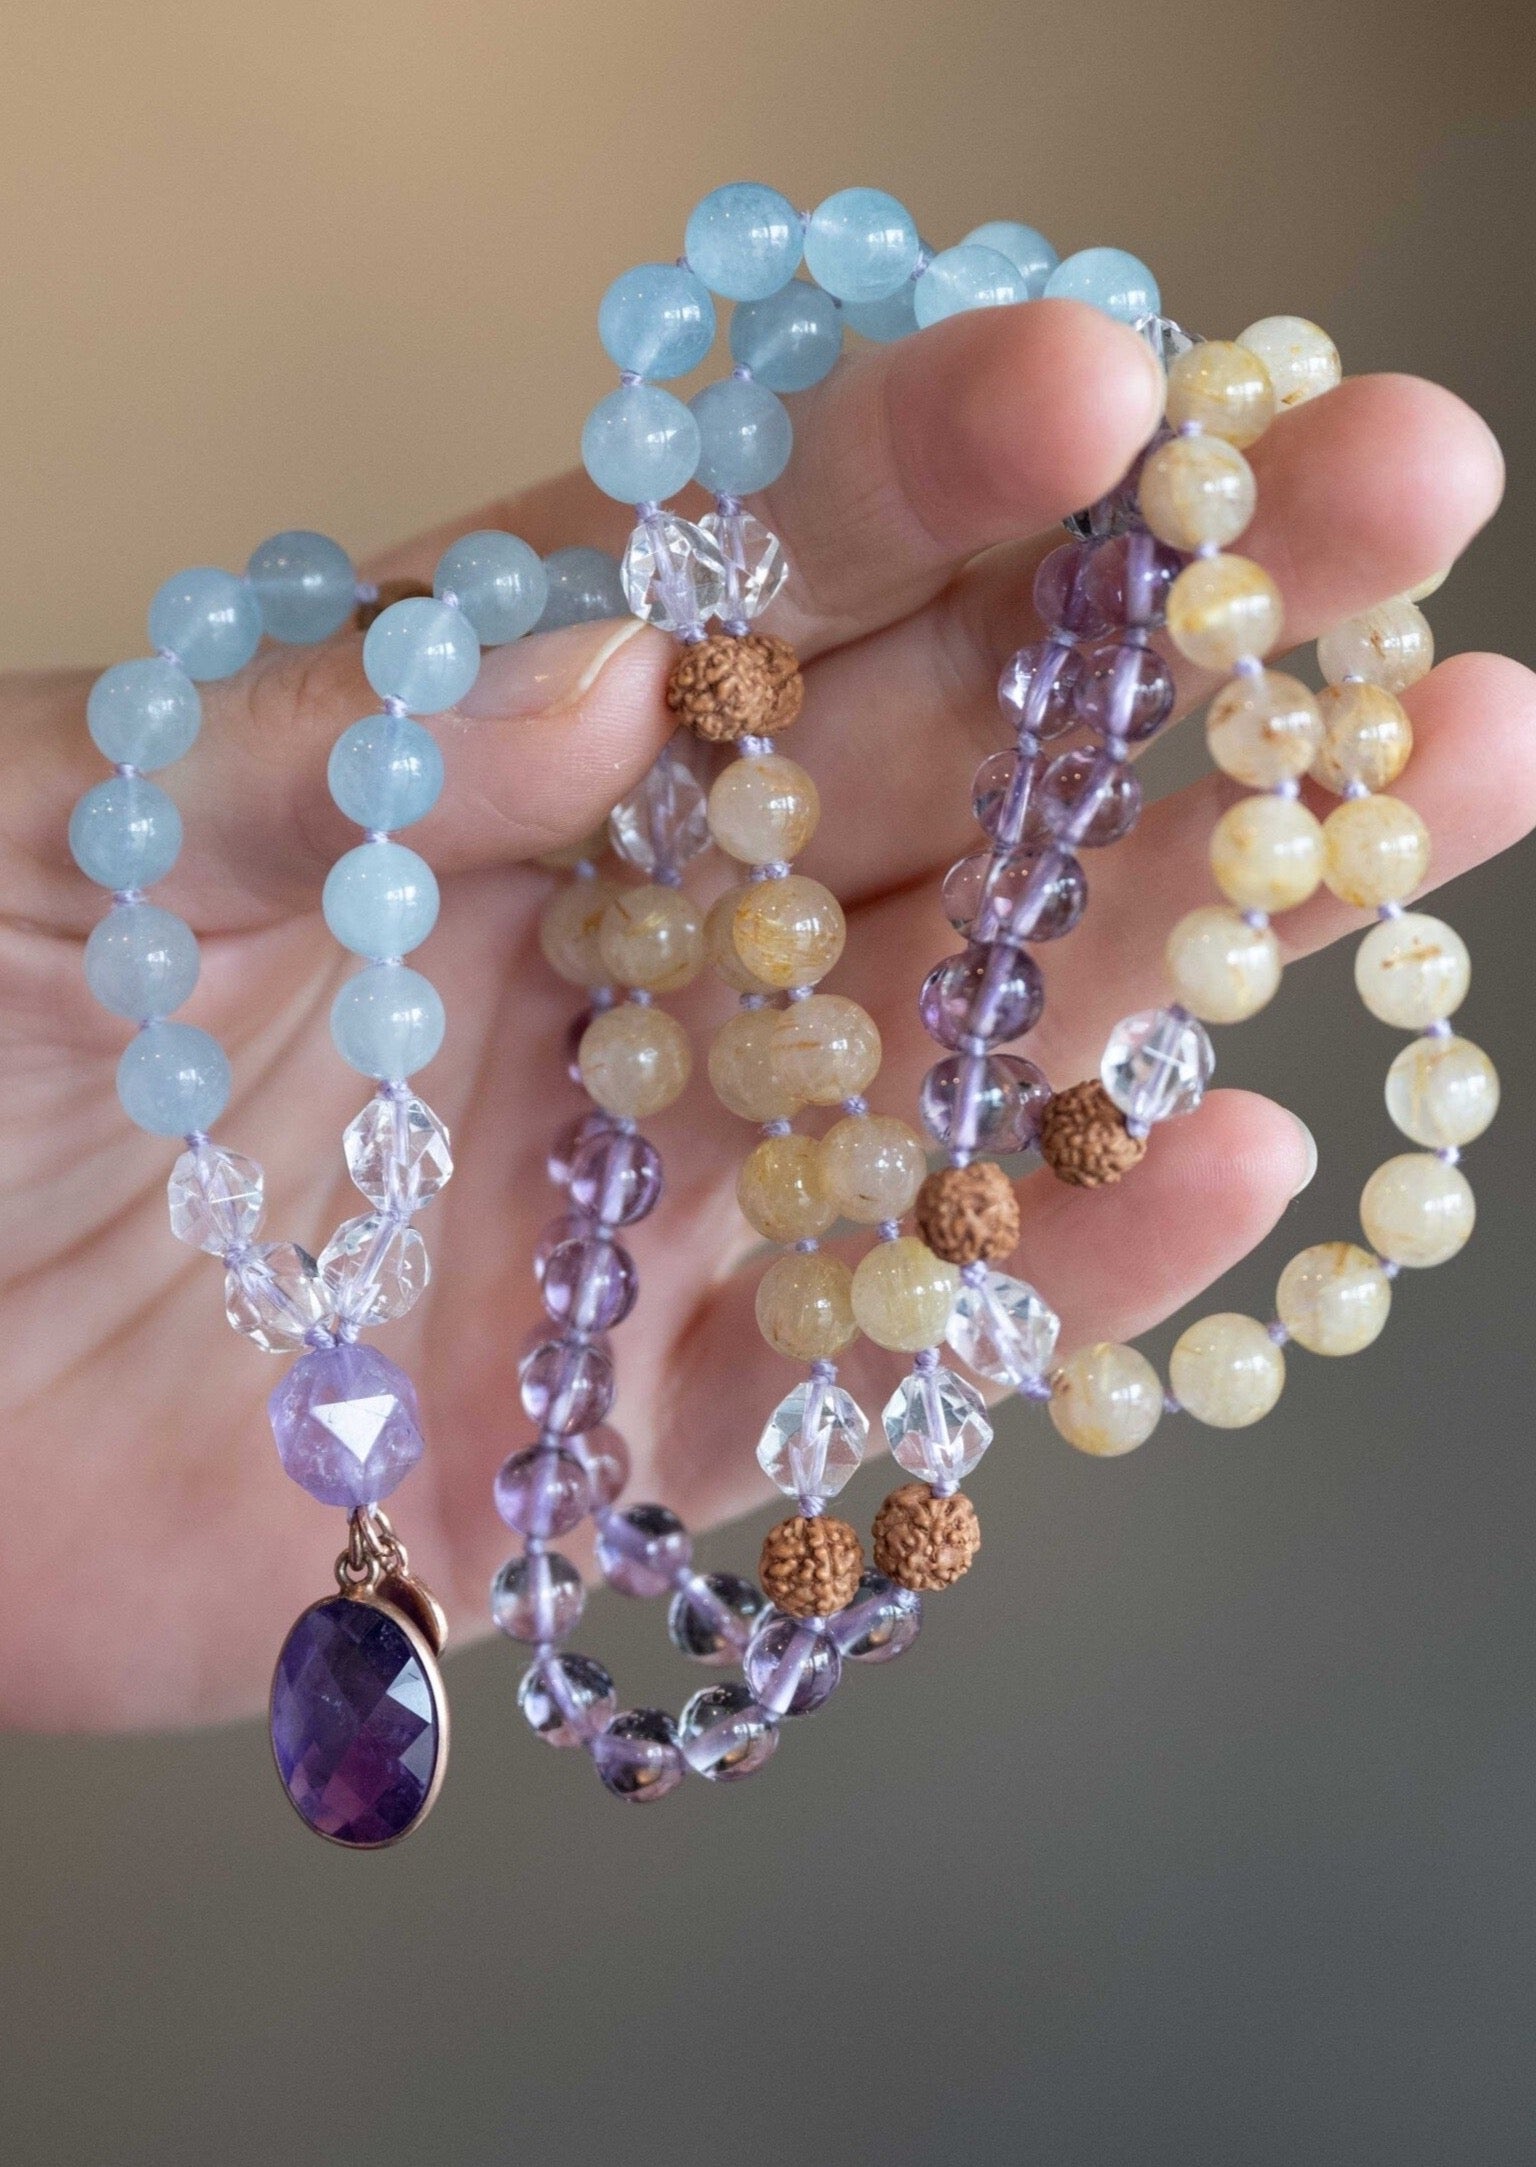 St Germain Mala Beads | Crystals for Ascension 